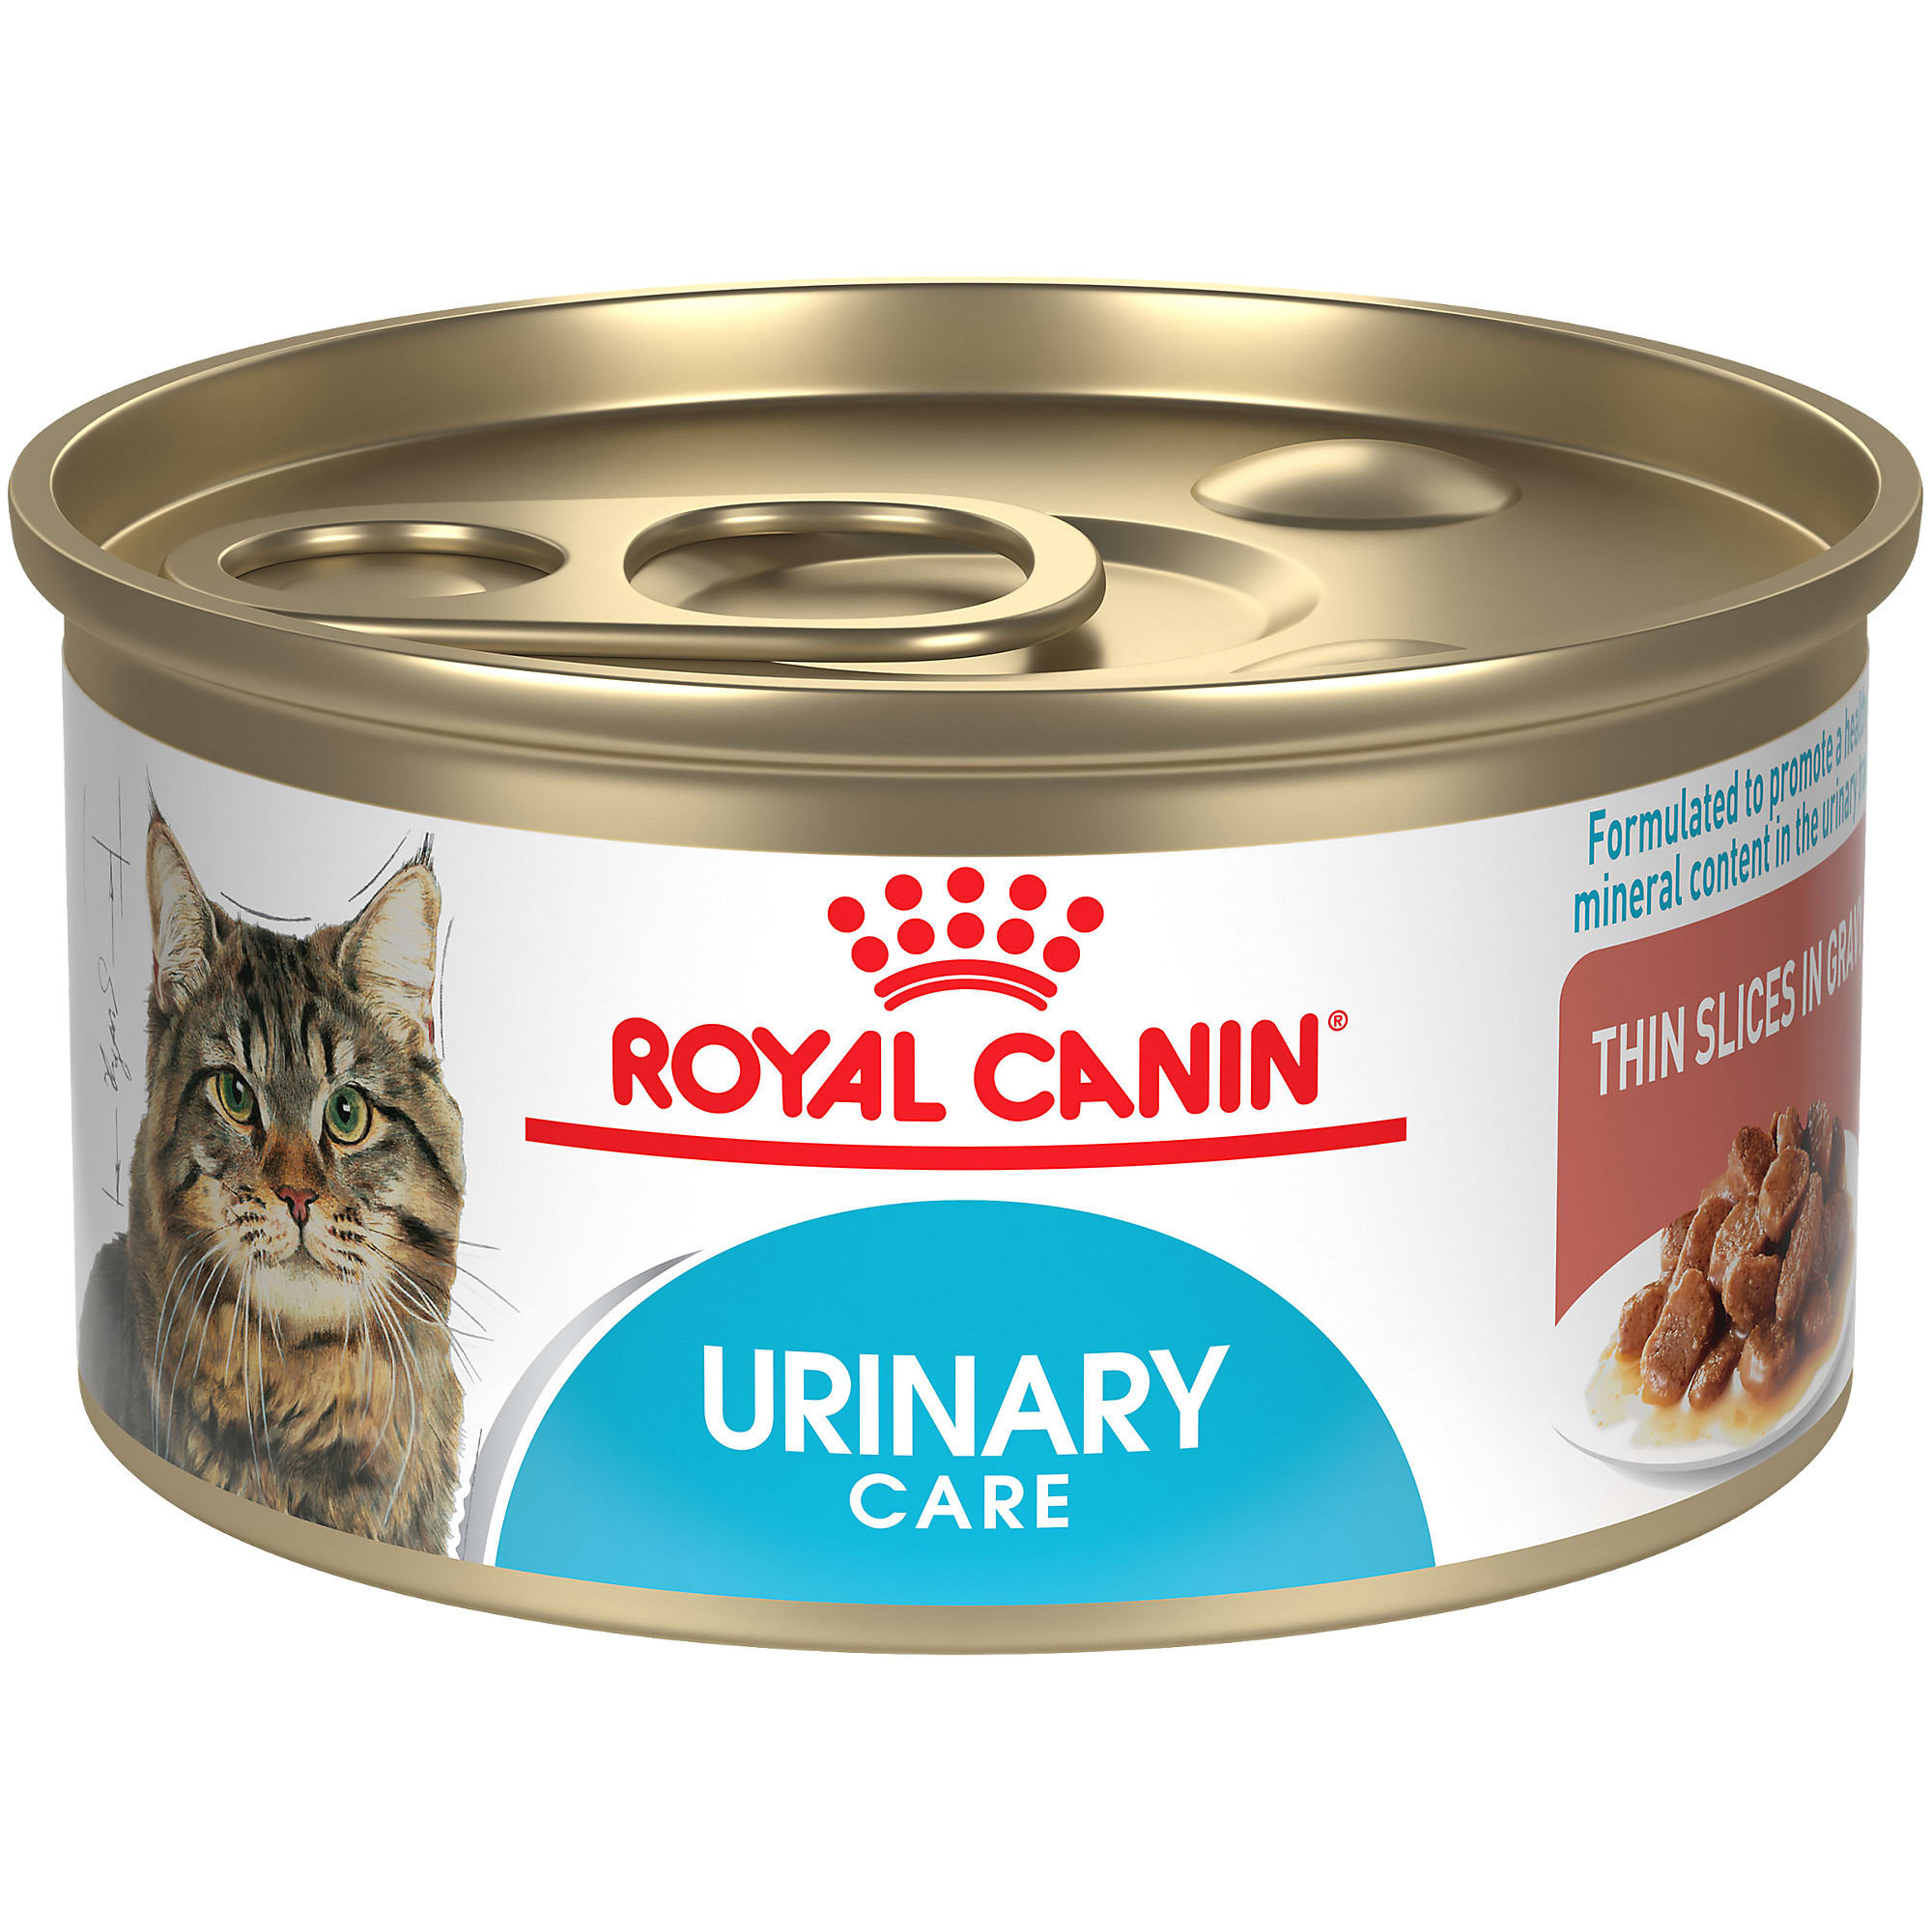 Royal Canin Feline Urinary Care Thin Slices in Gravy Adult Wet Cat Food